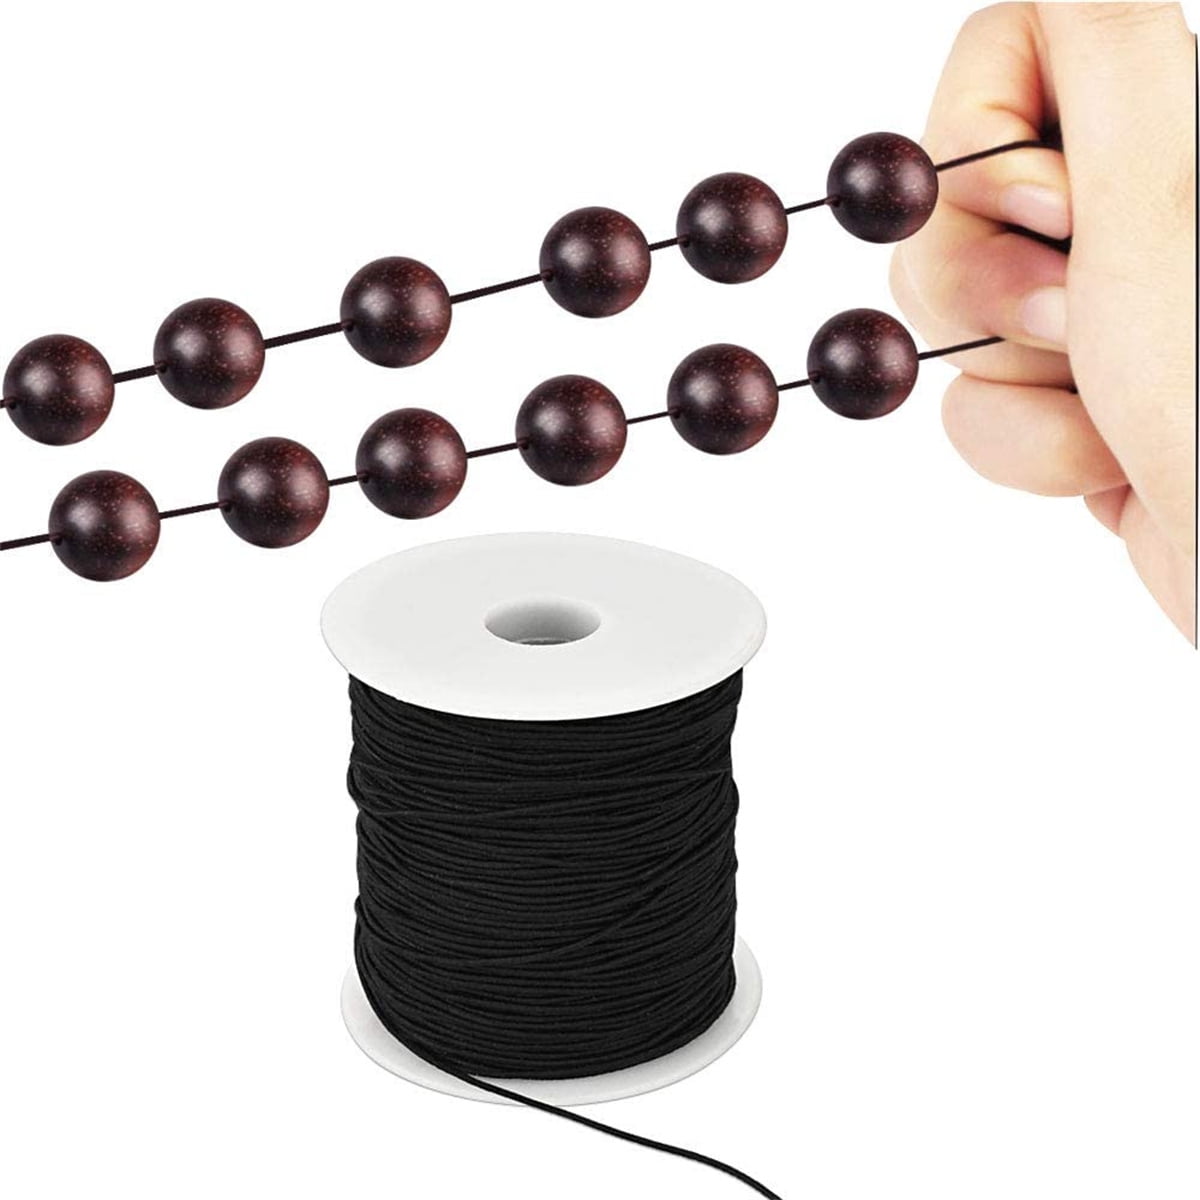  1mm Elastic Cord for Jewelry Making,Black and Clear